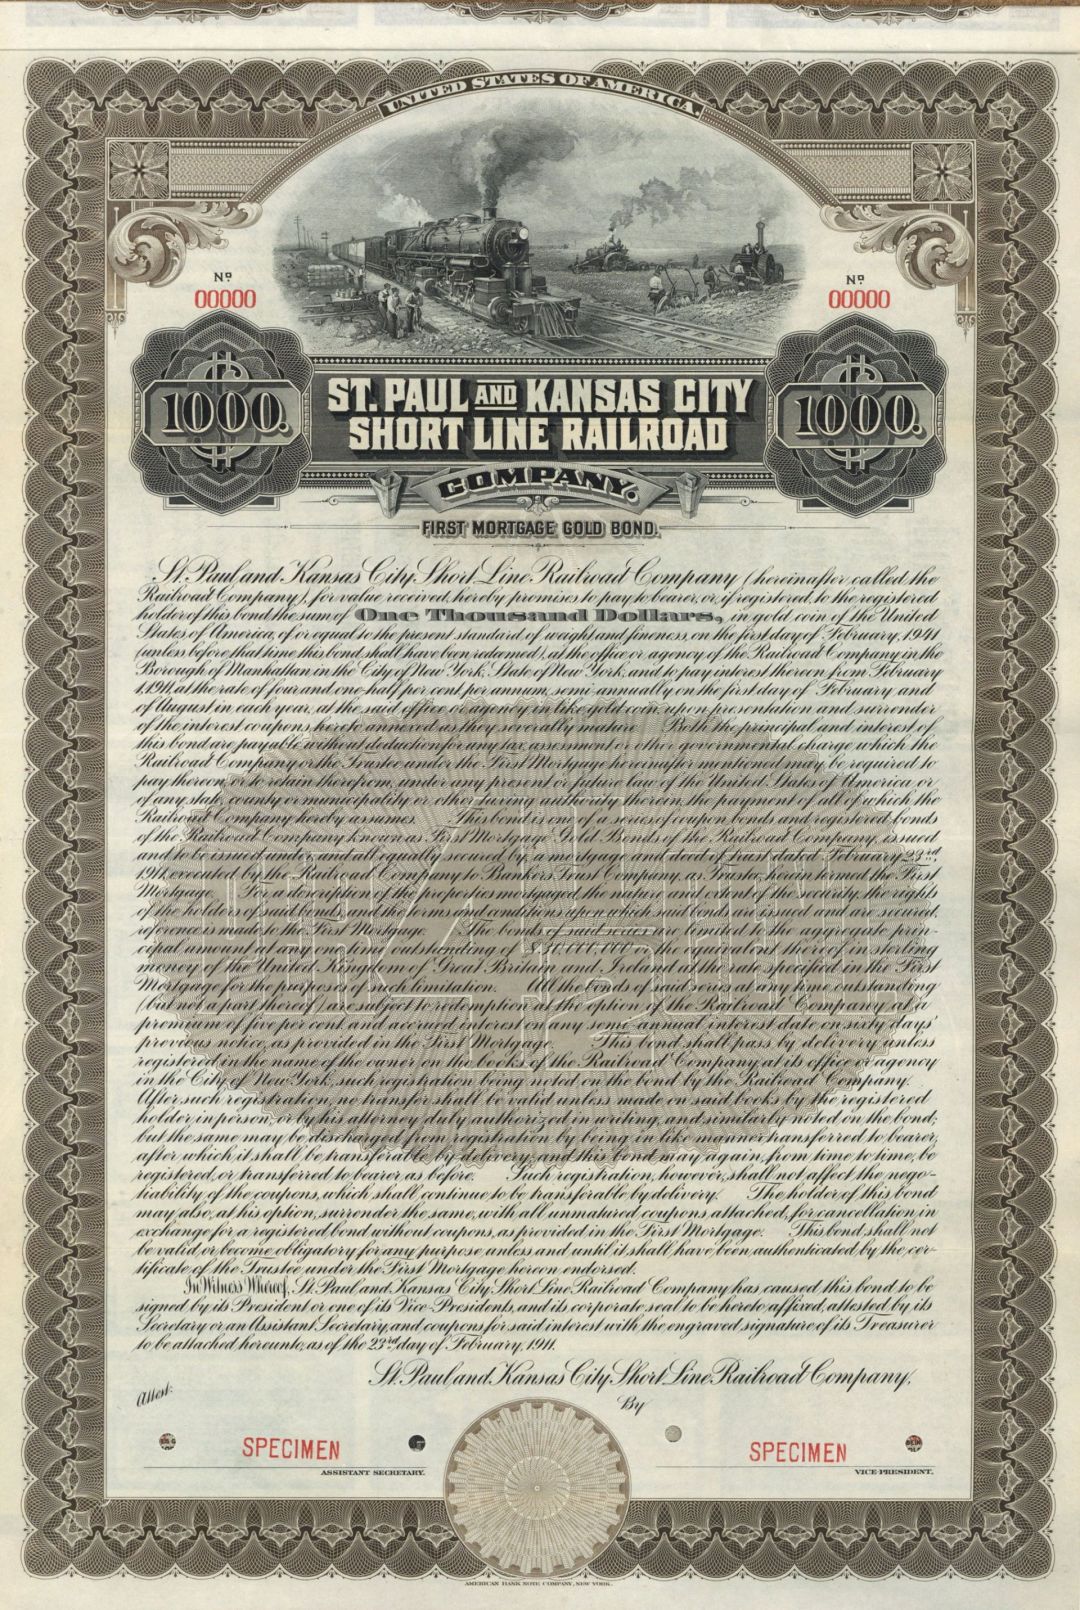 St. Paul and Kansas City Short Line Railroad Co. - Various Denominations Available - 1911 dated Specimen Railway Gold Bond - Specify Color when Ordering